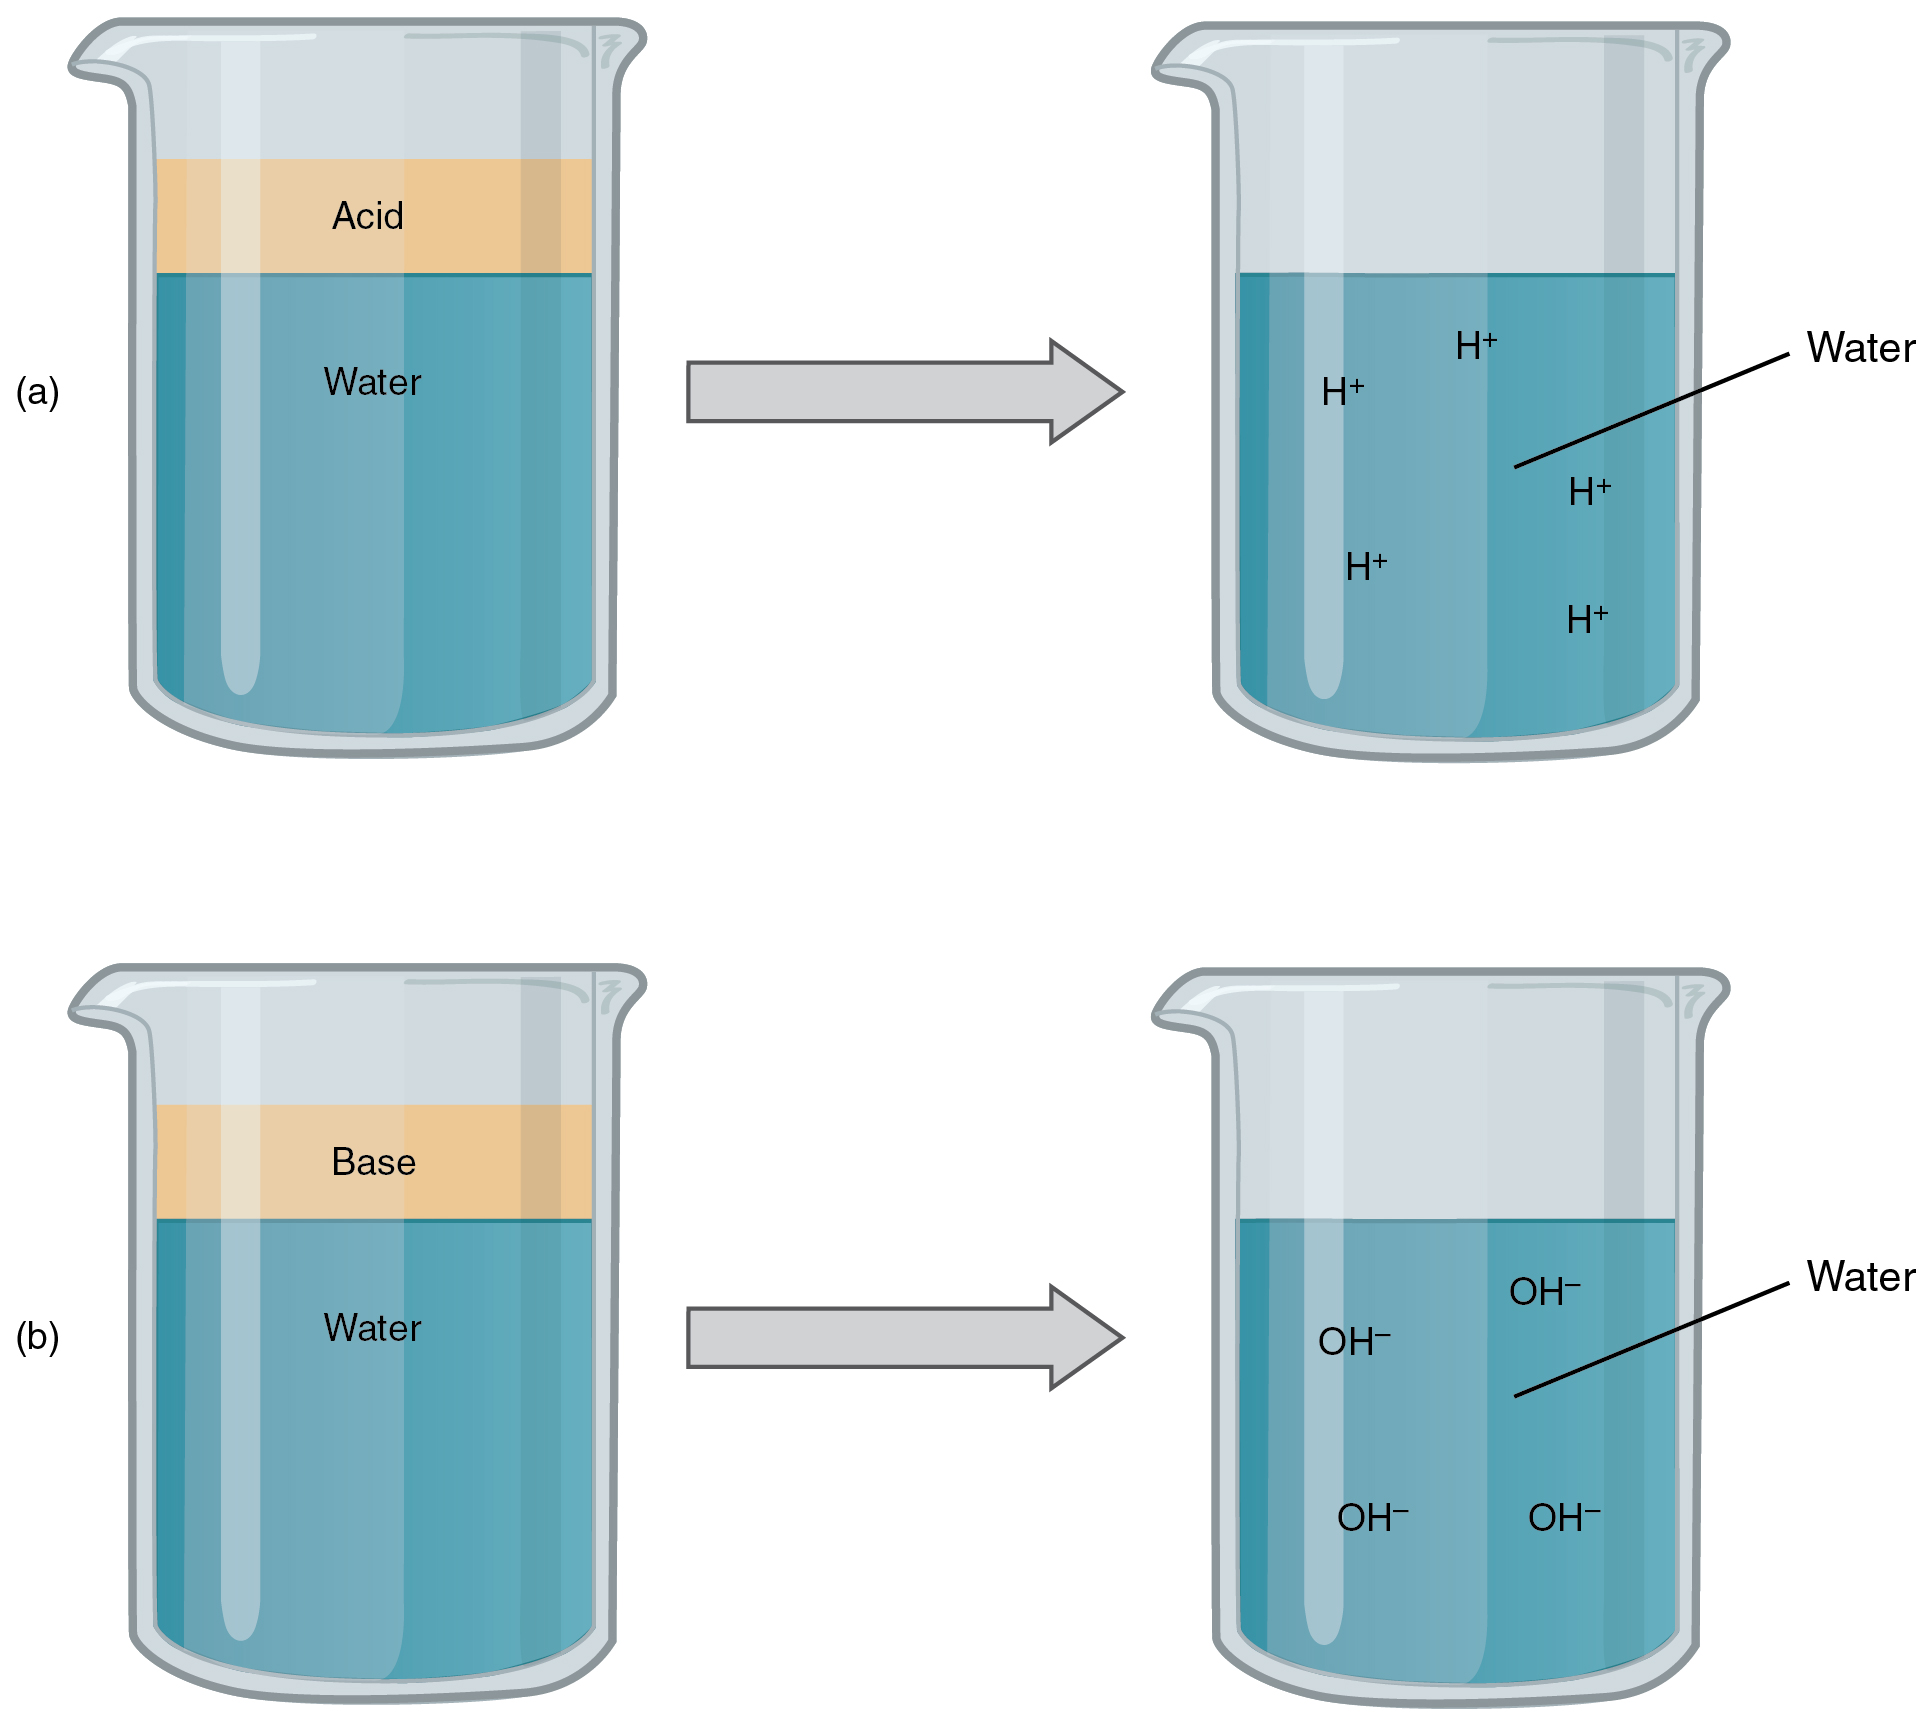 This figure shows four beakers containing different liquids.